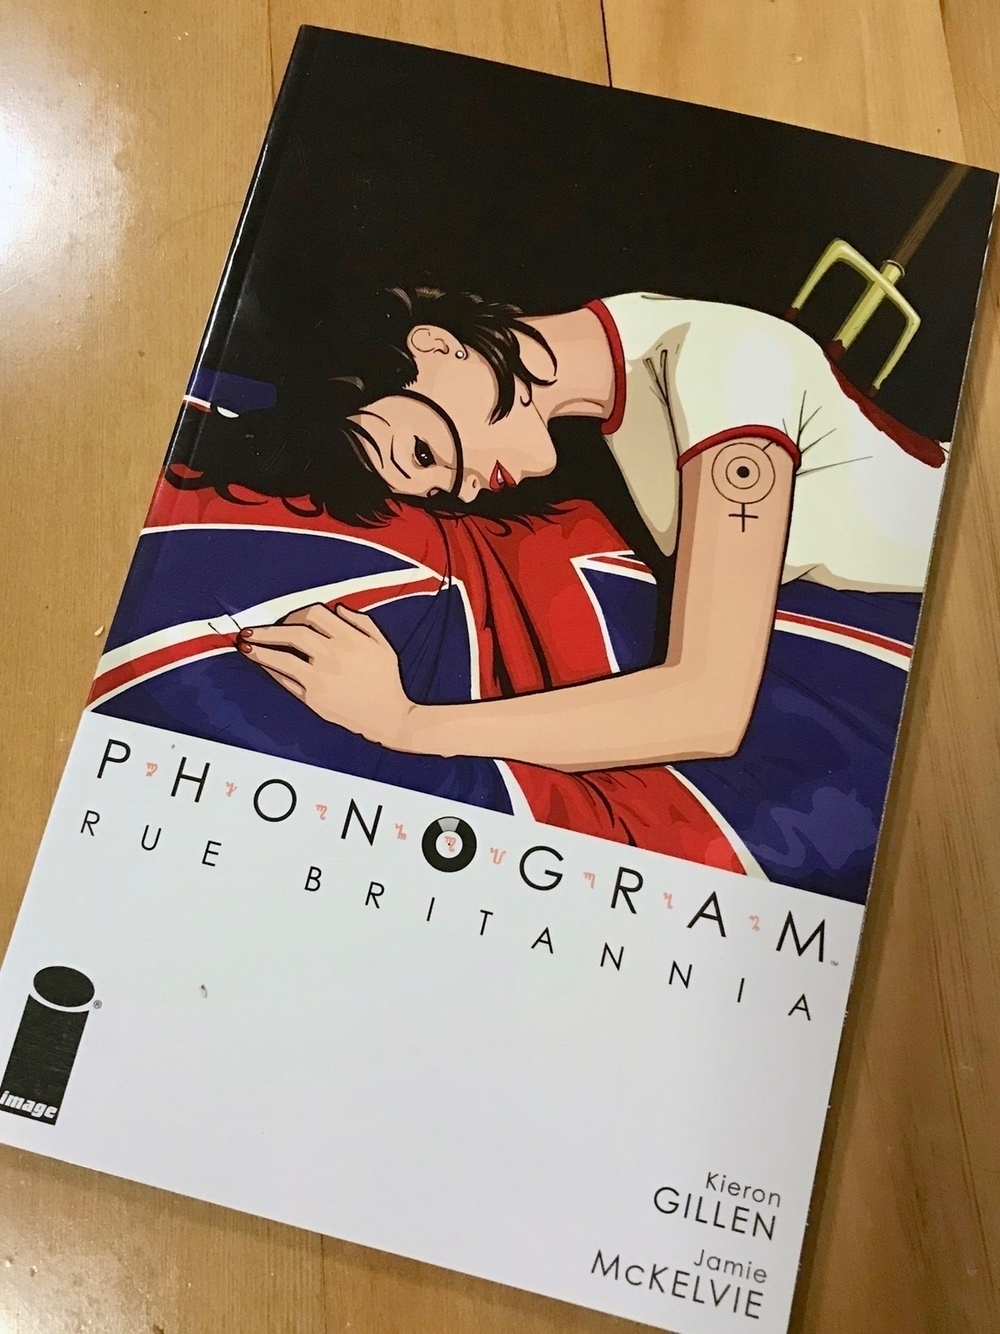 First collected volume of Phonogram